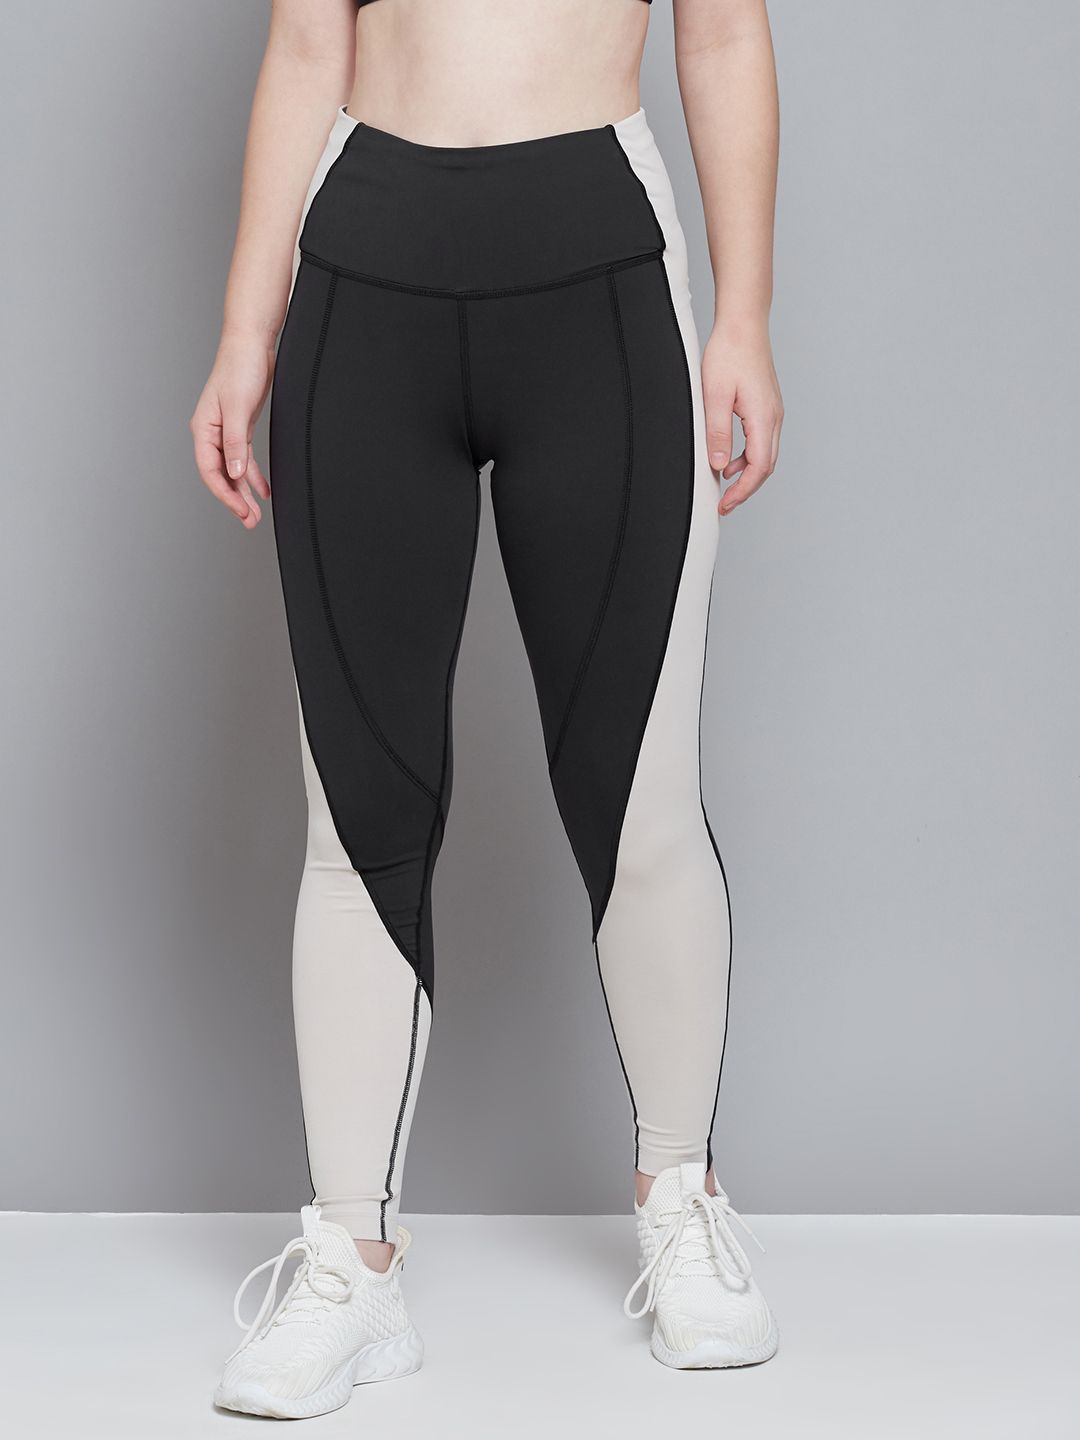 Reebok Women Black & Off-White Lux High-Rise Colourblock Training Tights Price in India